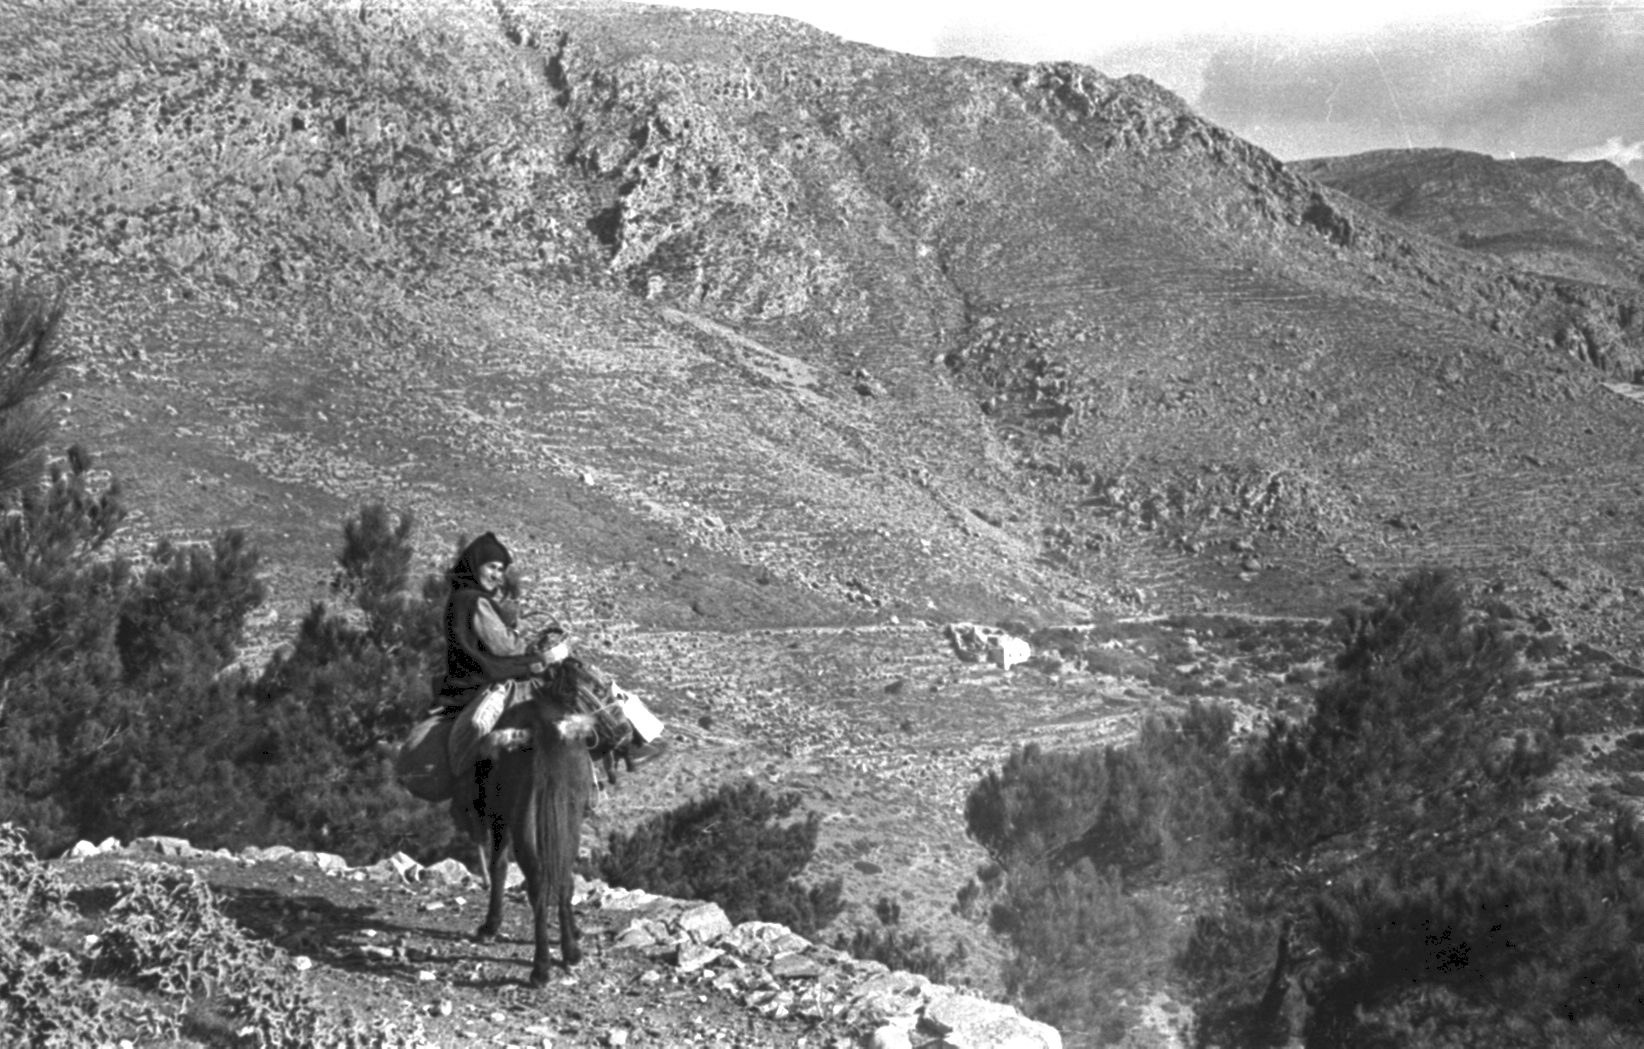 On a mule in the mountains of Karpathos